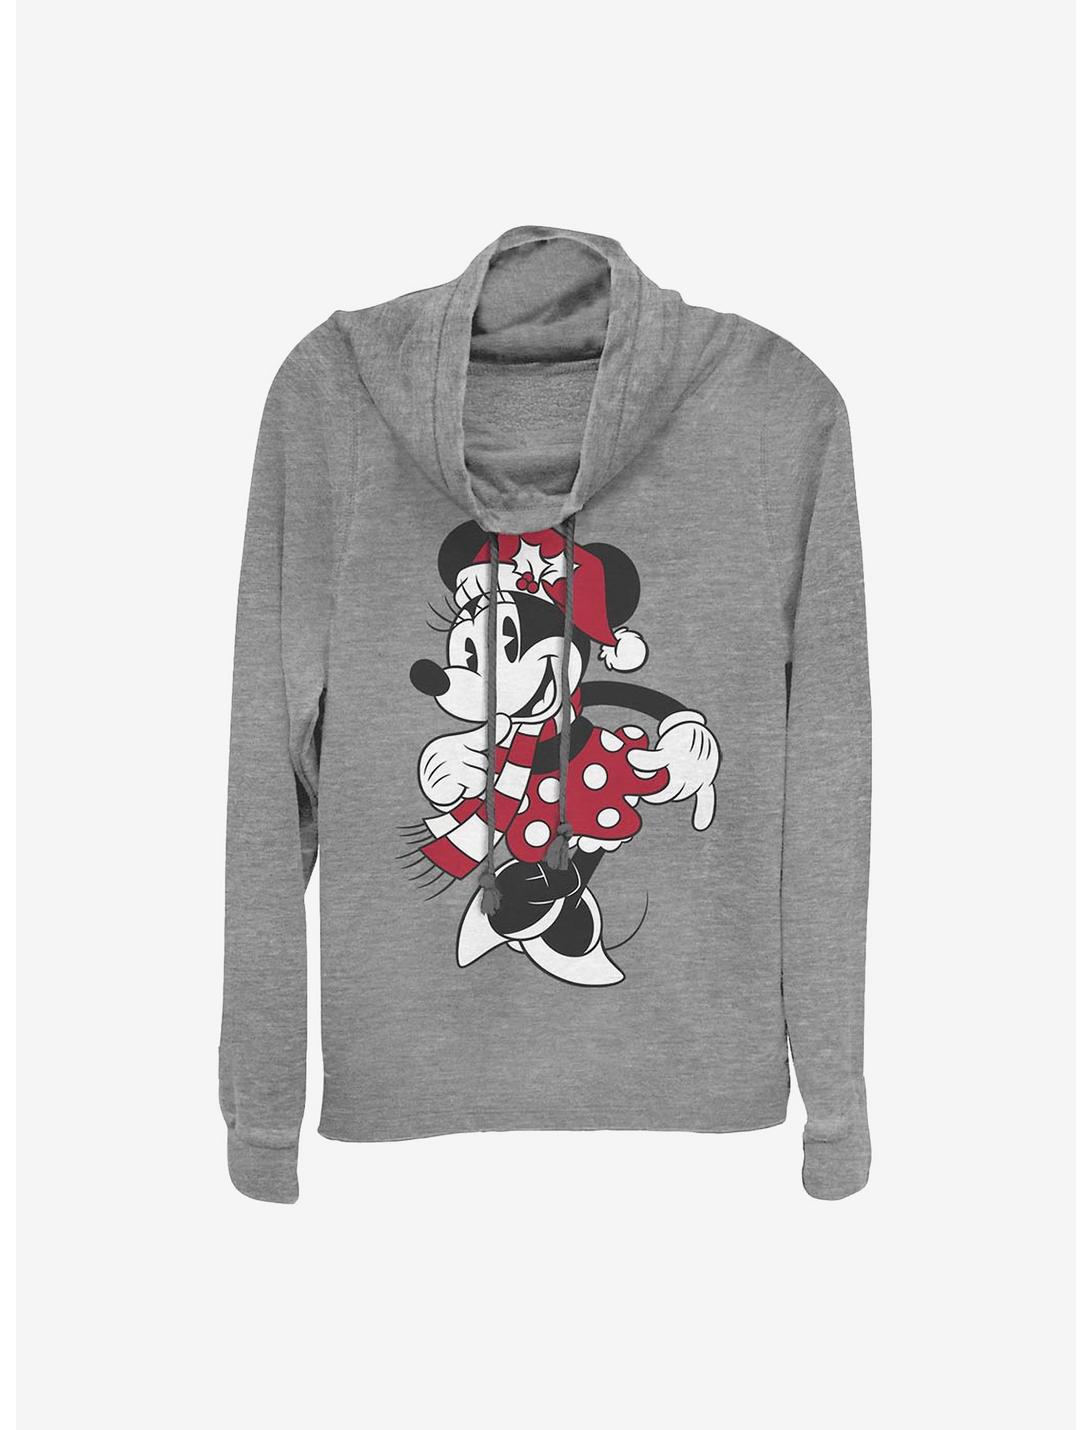 Disney Minnie Mouse Minnie Hat Cowl Neck Long-Sleeve Womens Top, GRAY HTR, hi-res